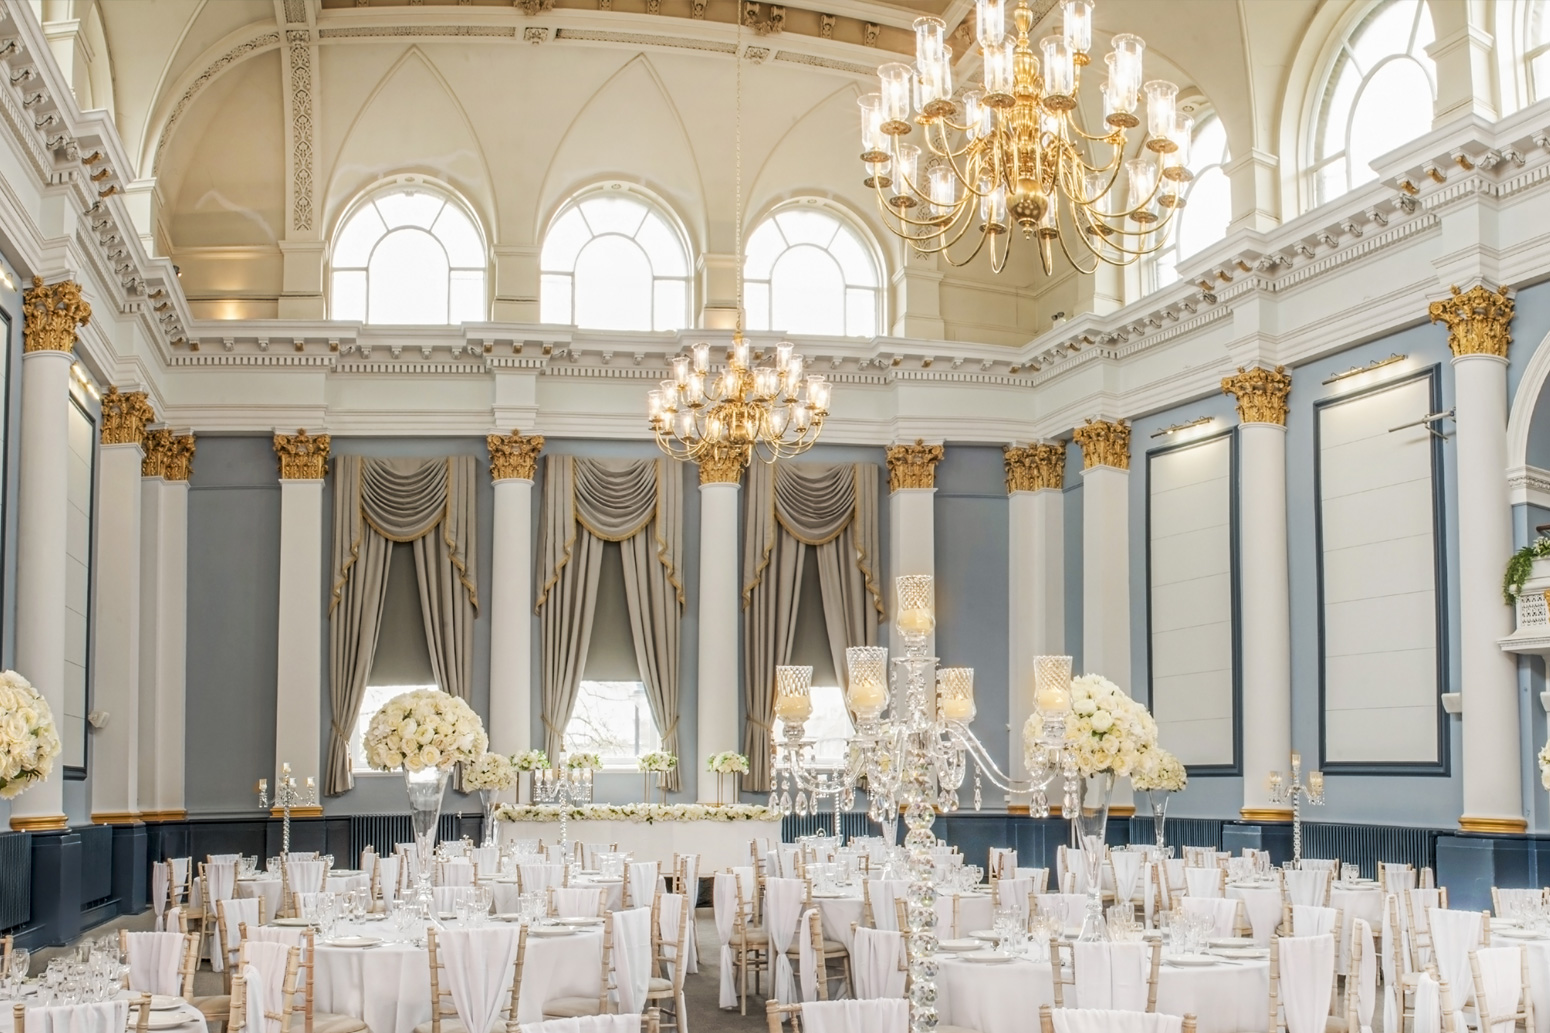 The main wedding room at the Corn Exchange.